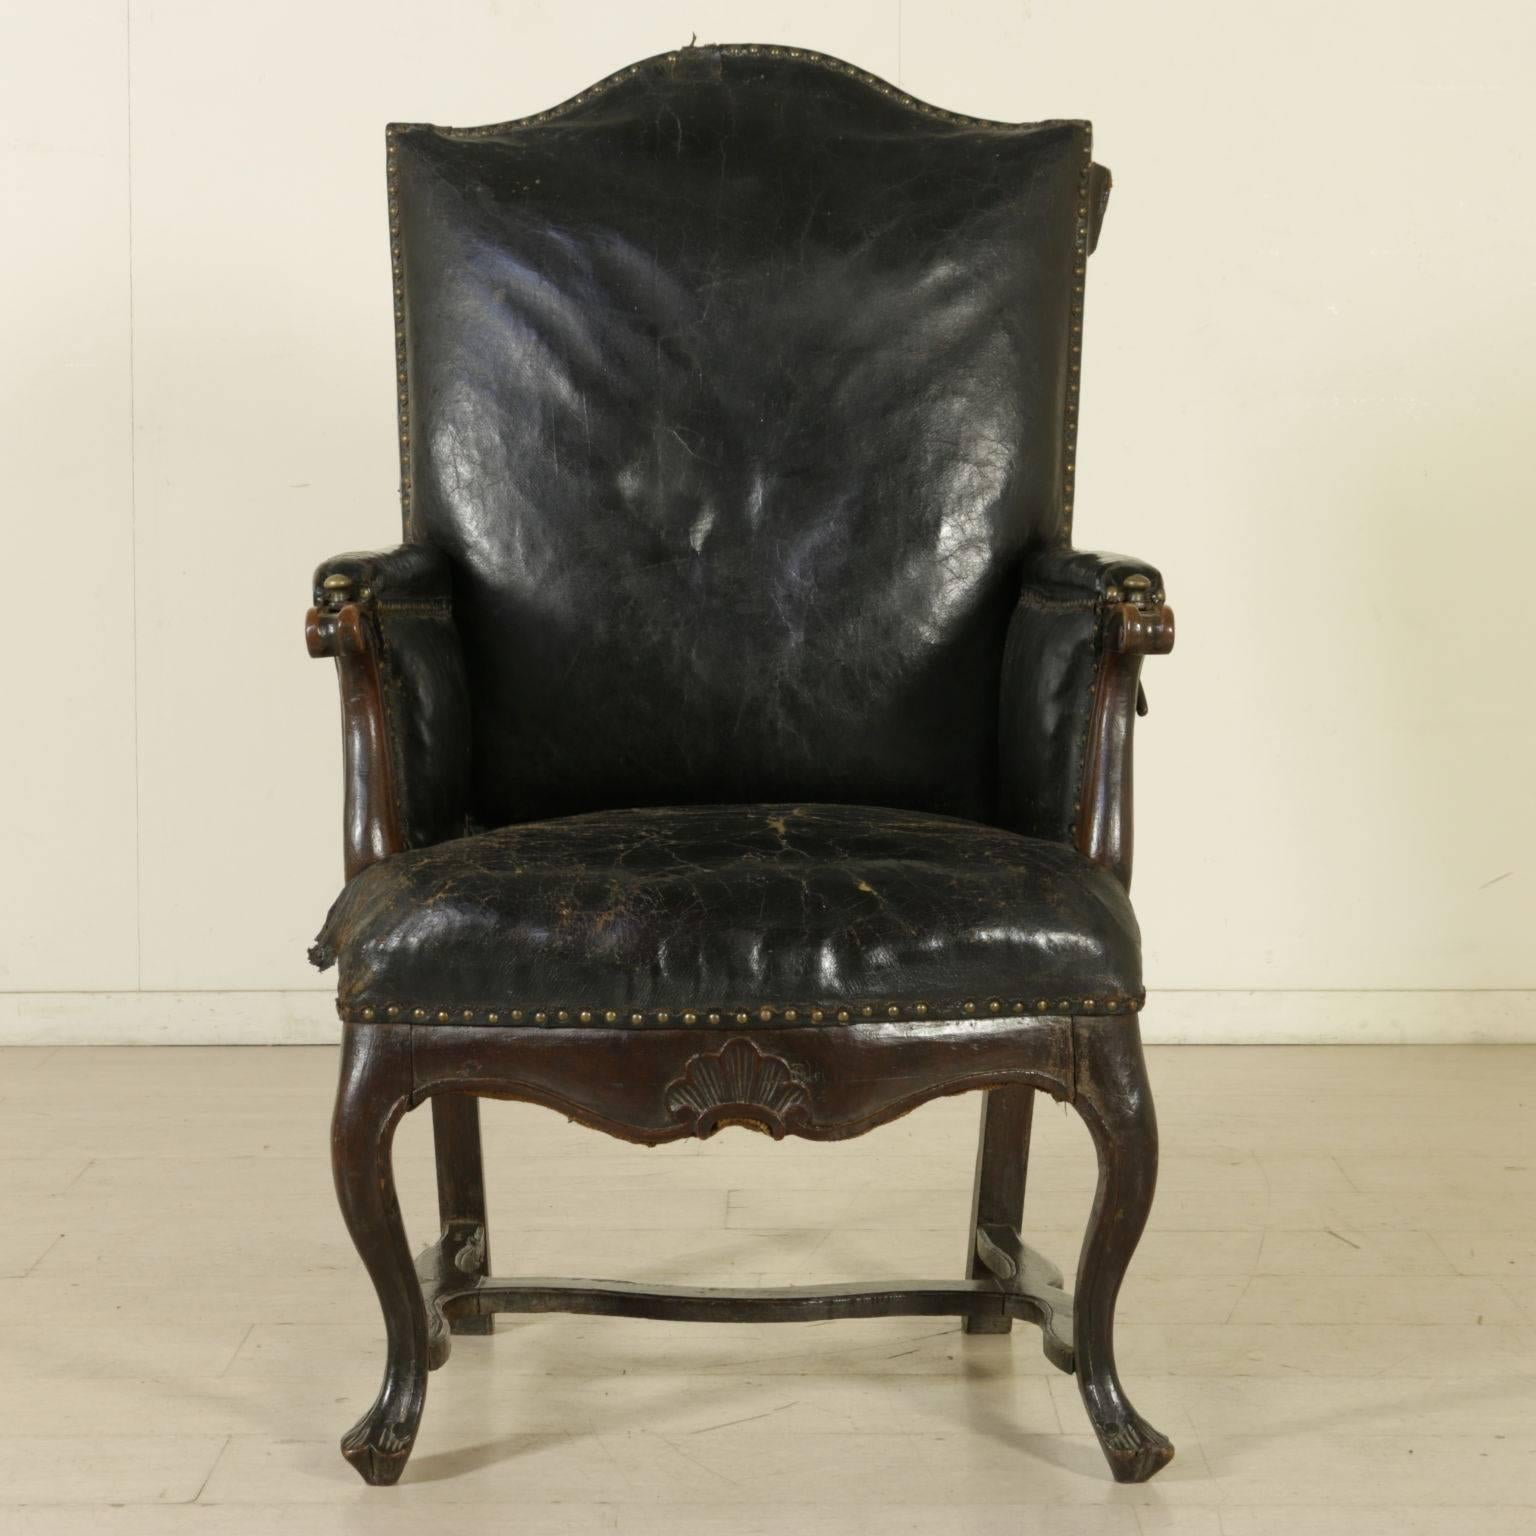 An important walnut armchair with moved and carved legs, joined by shaped crossbar. The armrests, decorated with curls, hide iron supports with bronze knobs functioning as a tray holder. The shaped backrest is reclining and adjustable through side